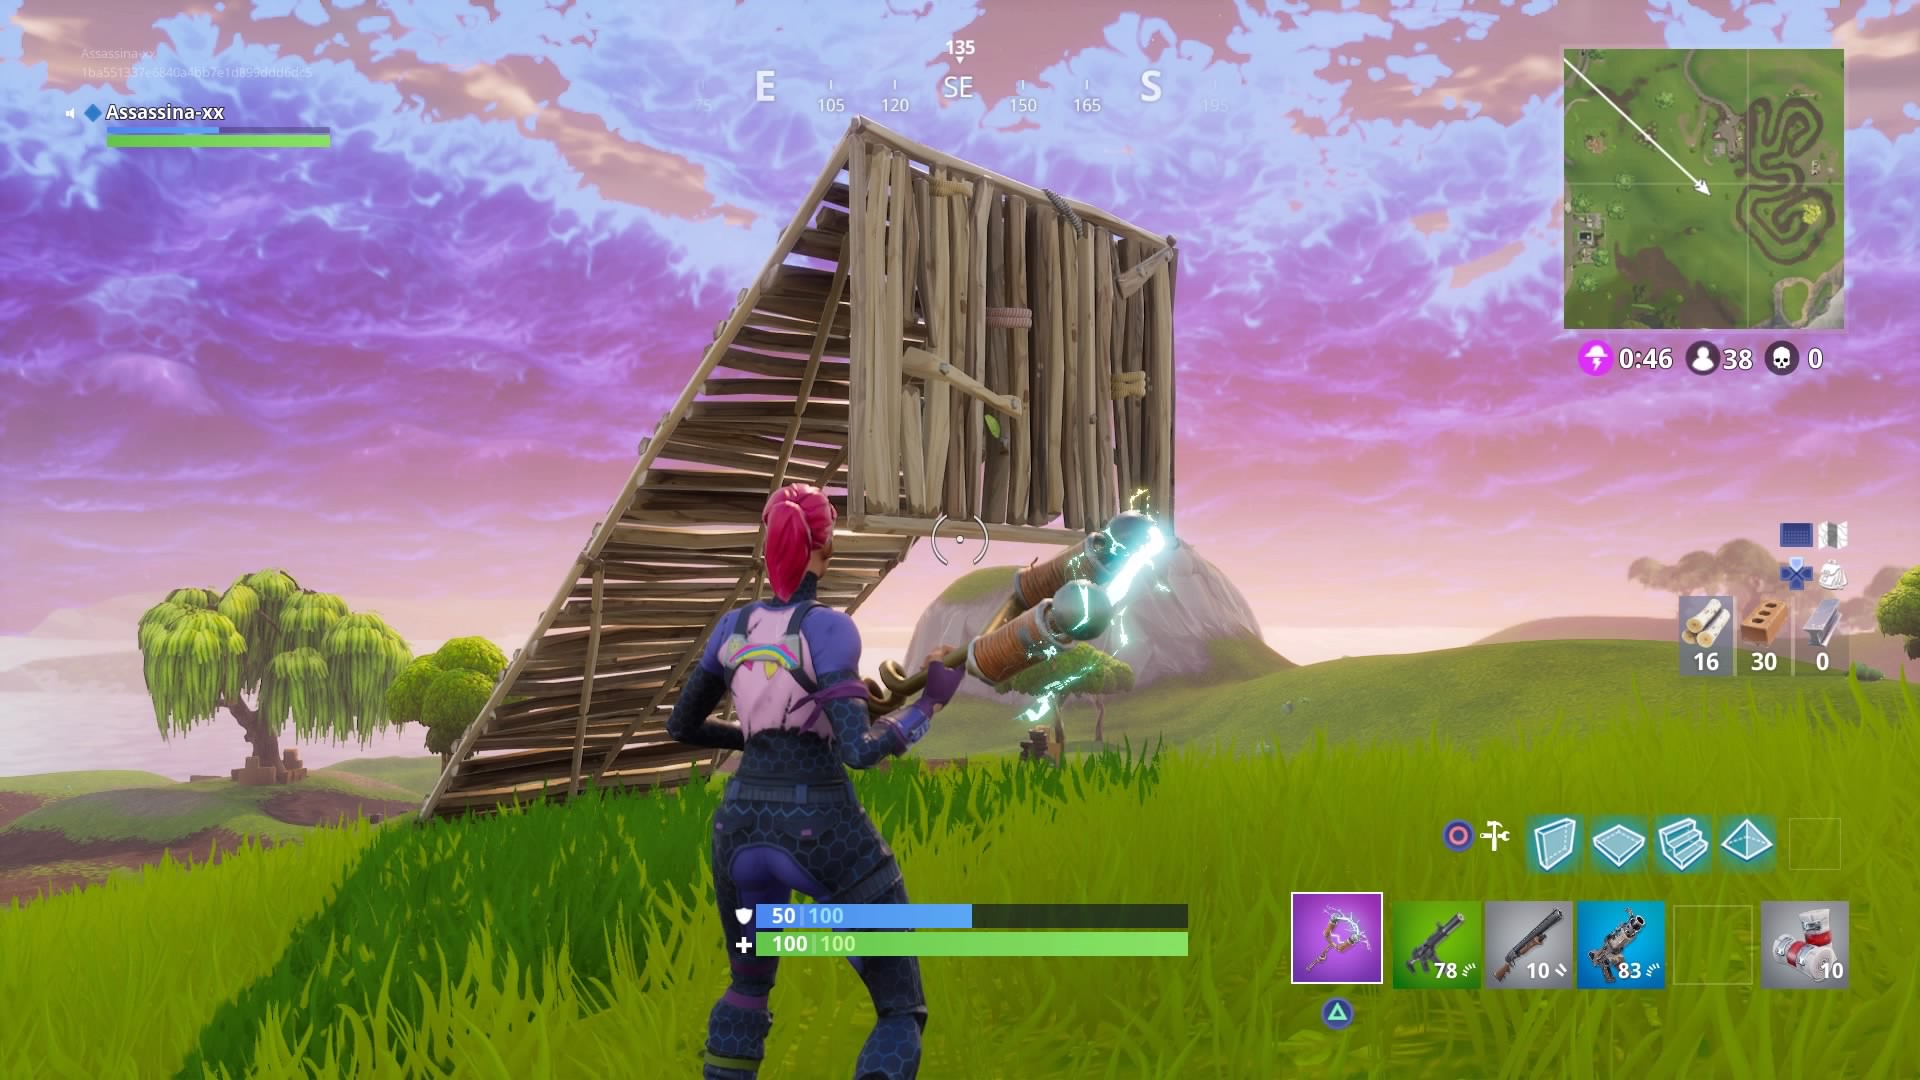 Build stairs and walls to give yourself an advantage in combat in Fortnite